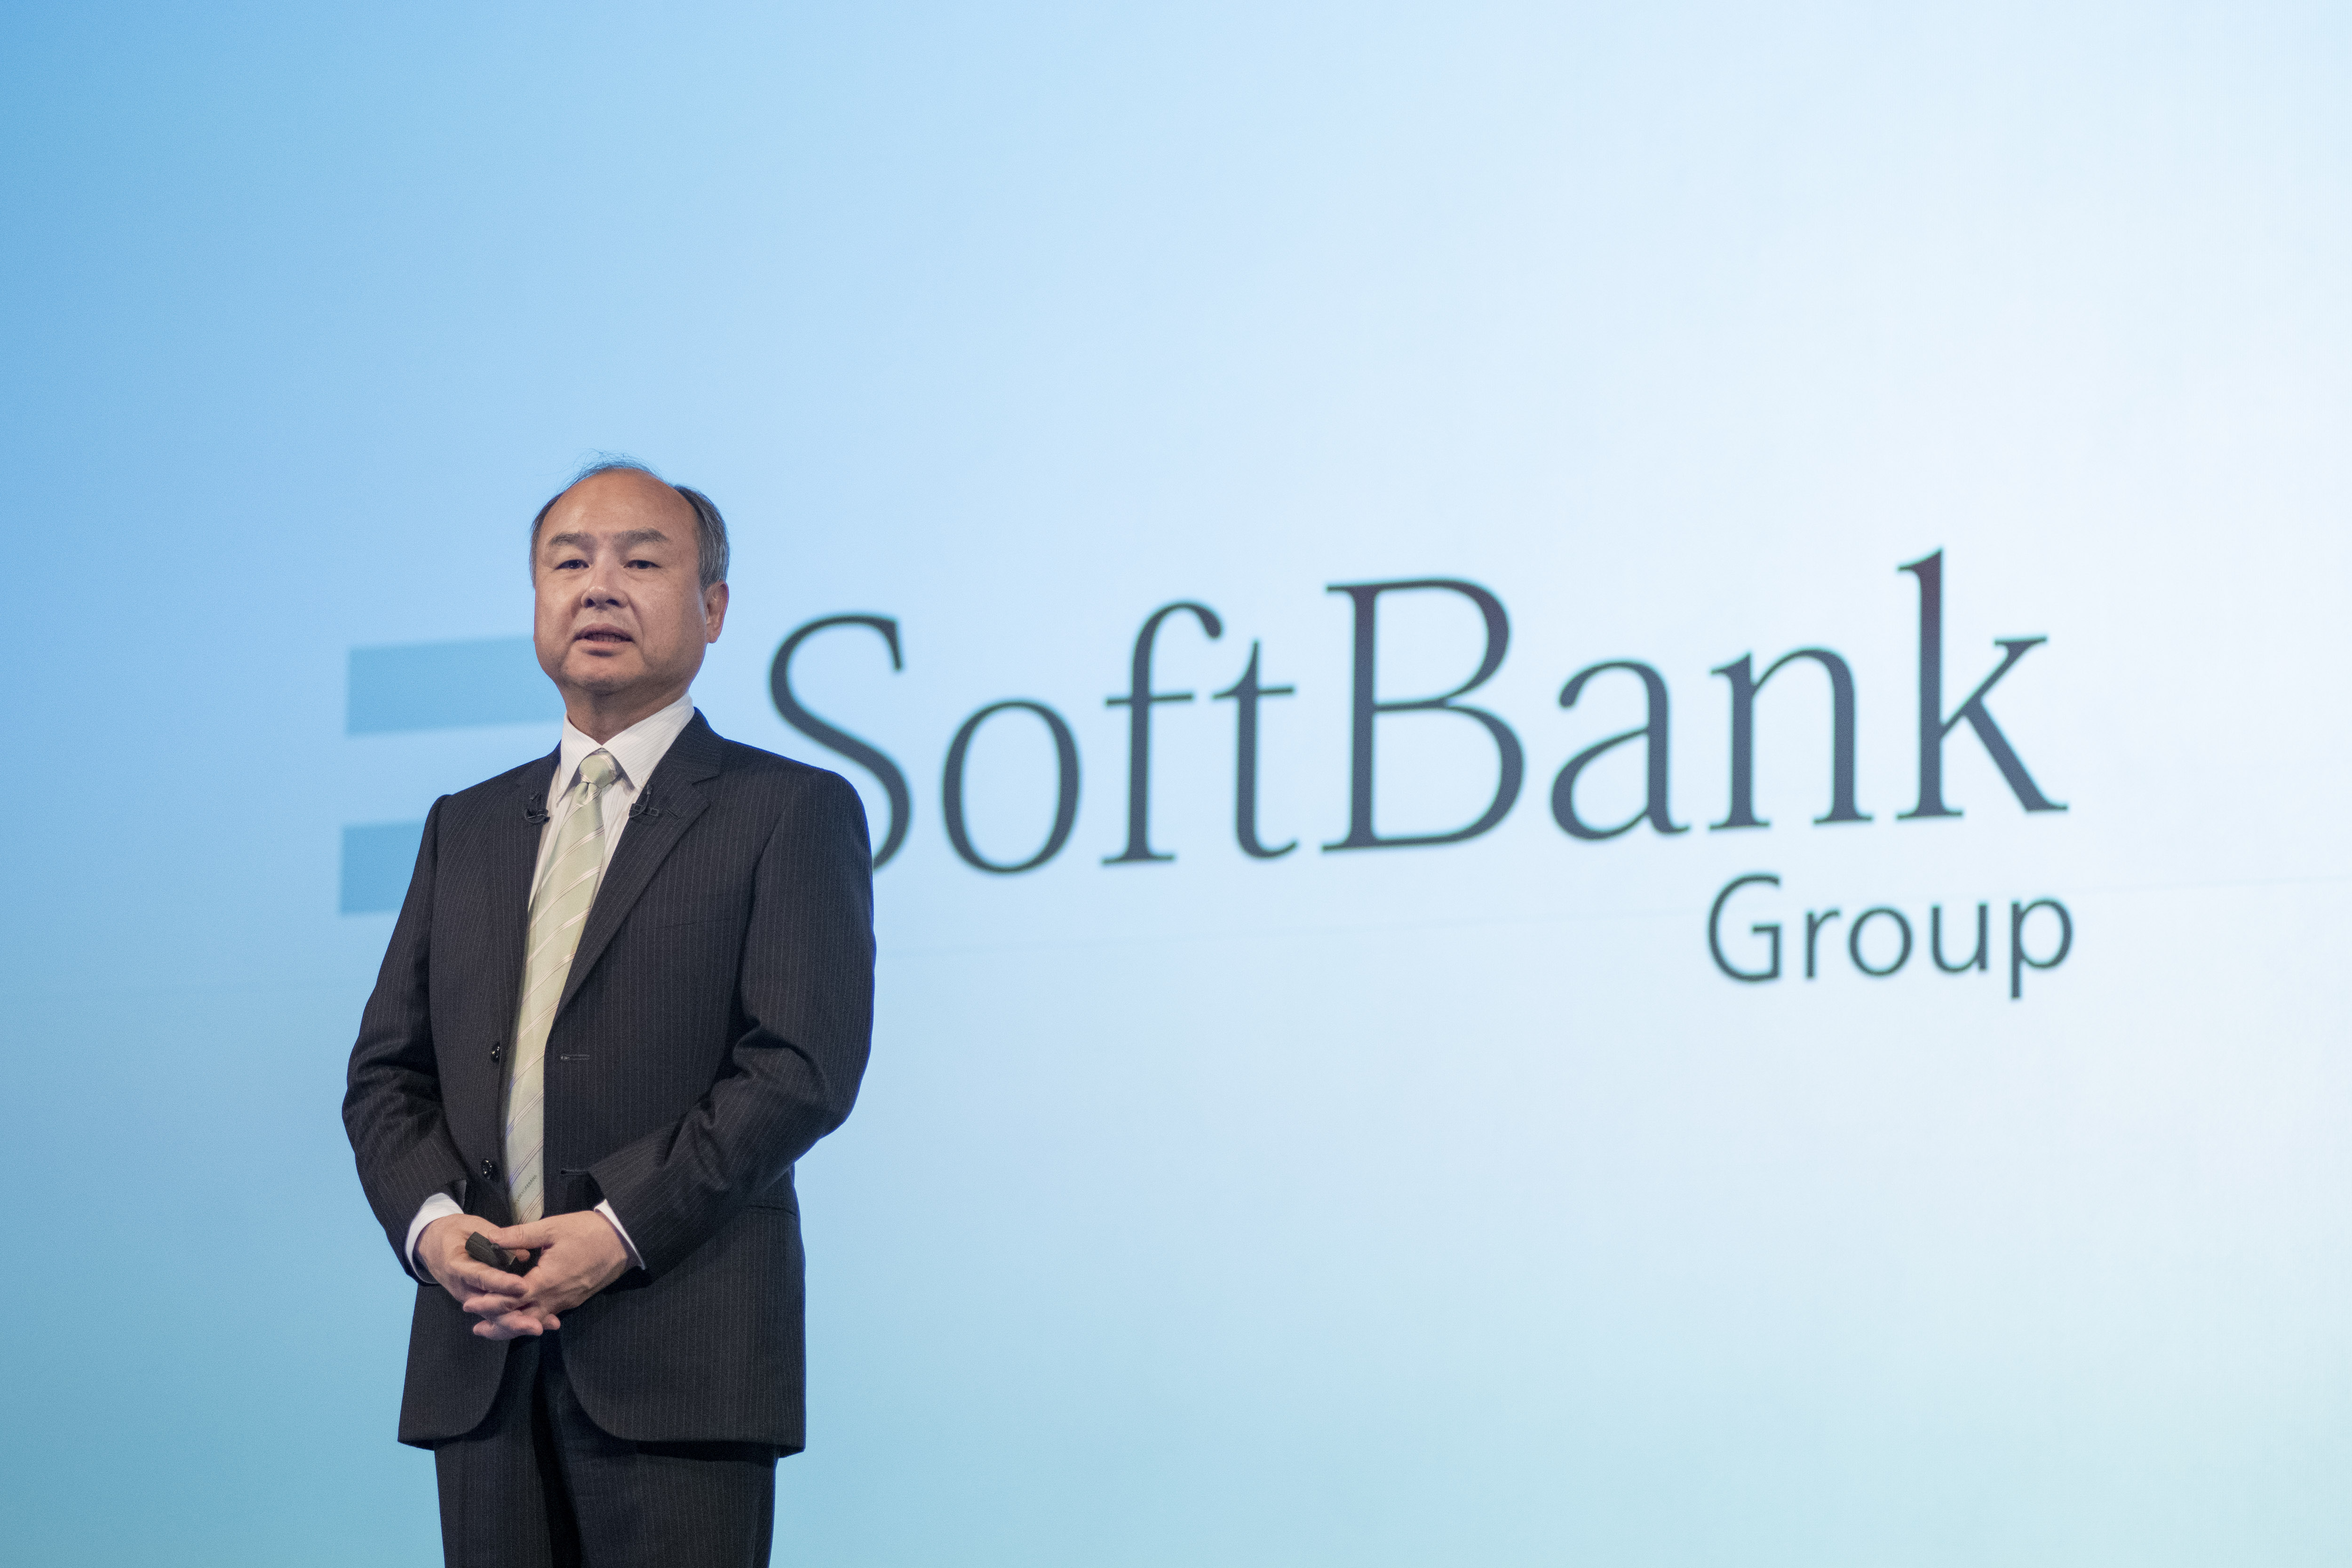 Masayoshi Son, chairman and chief executive officer of SoftBank Group Corp., speaks during a news conference in Tokyo, Japan, on Wednesday, Feb. 12, 2020. SoftBanklost money in its Vision Fun